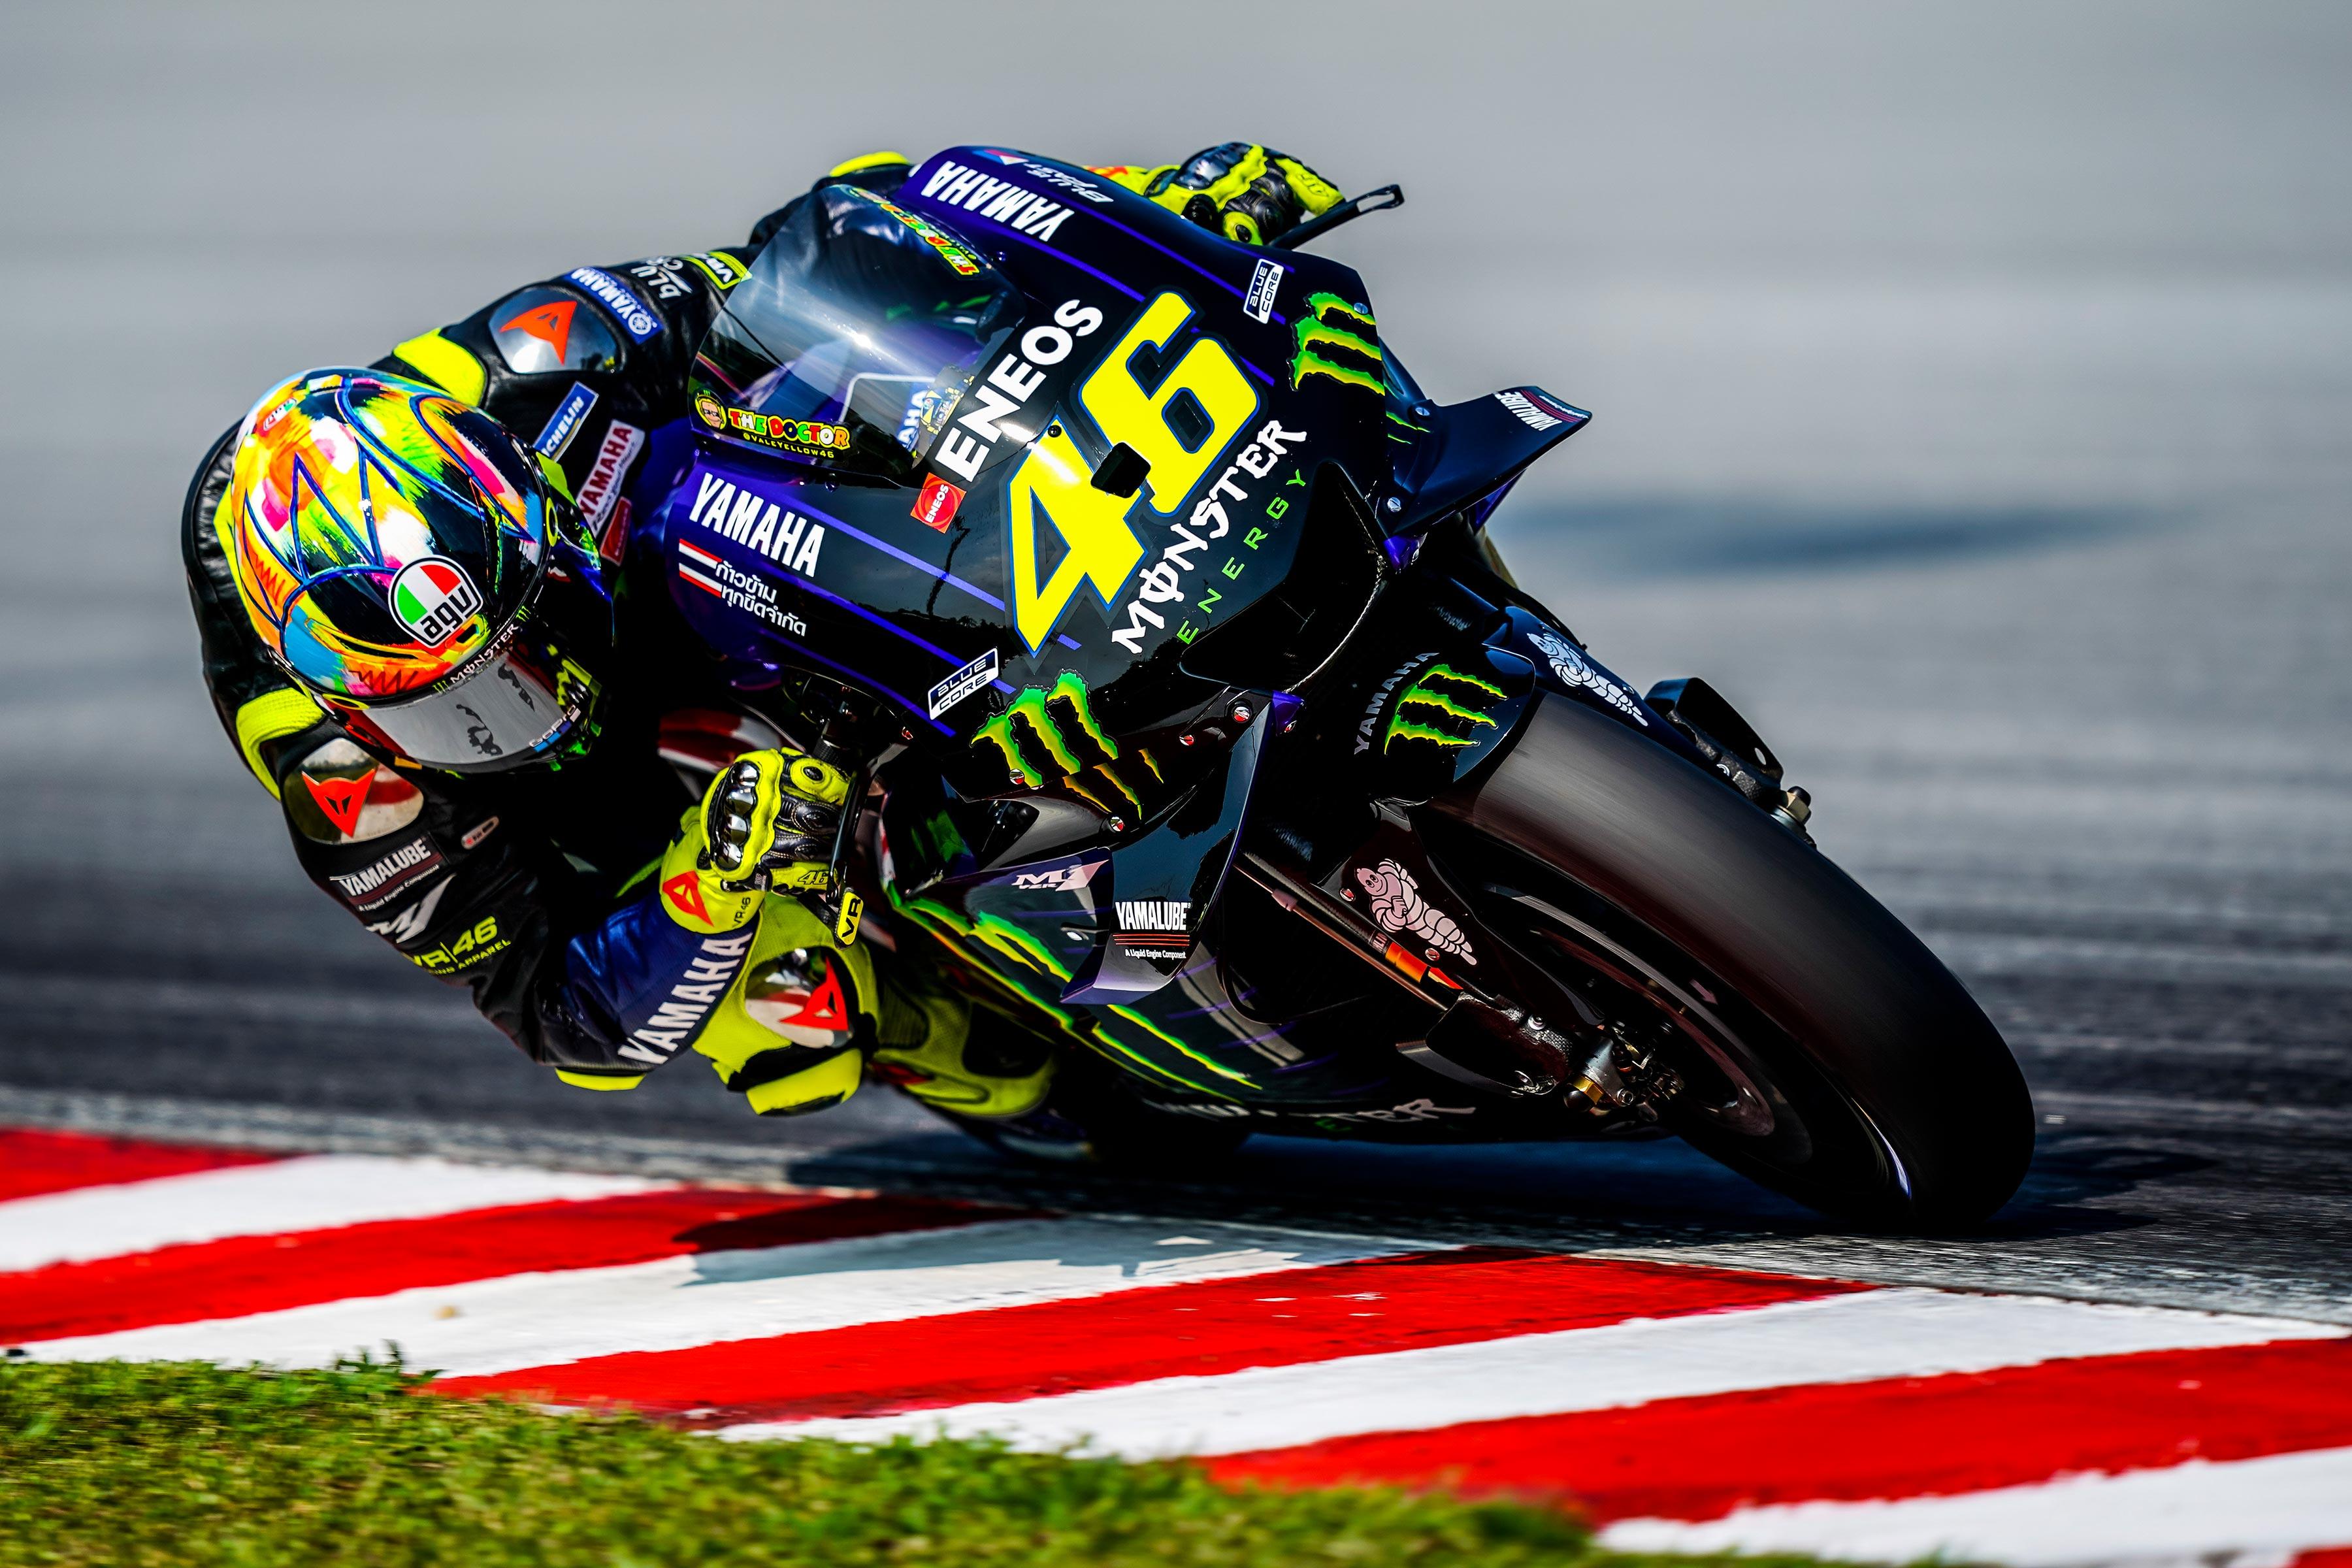 rossi 4K wallpaper for your desktop or mobile screen free and easy